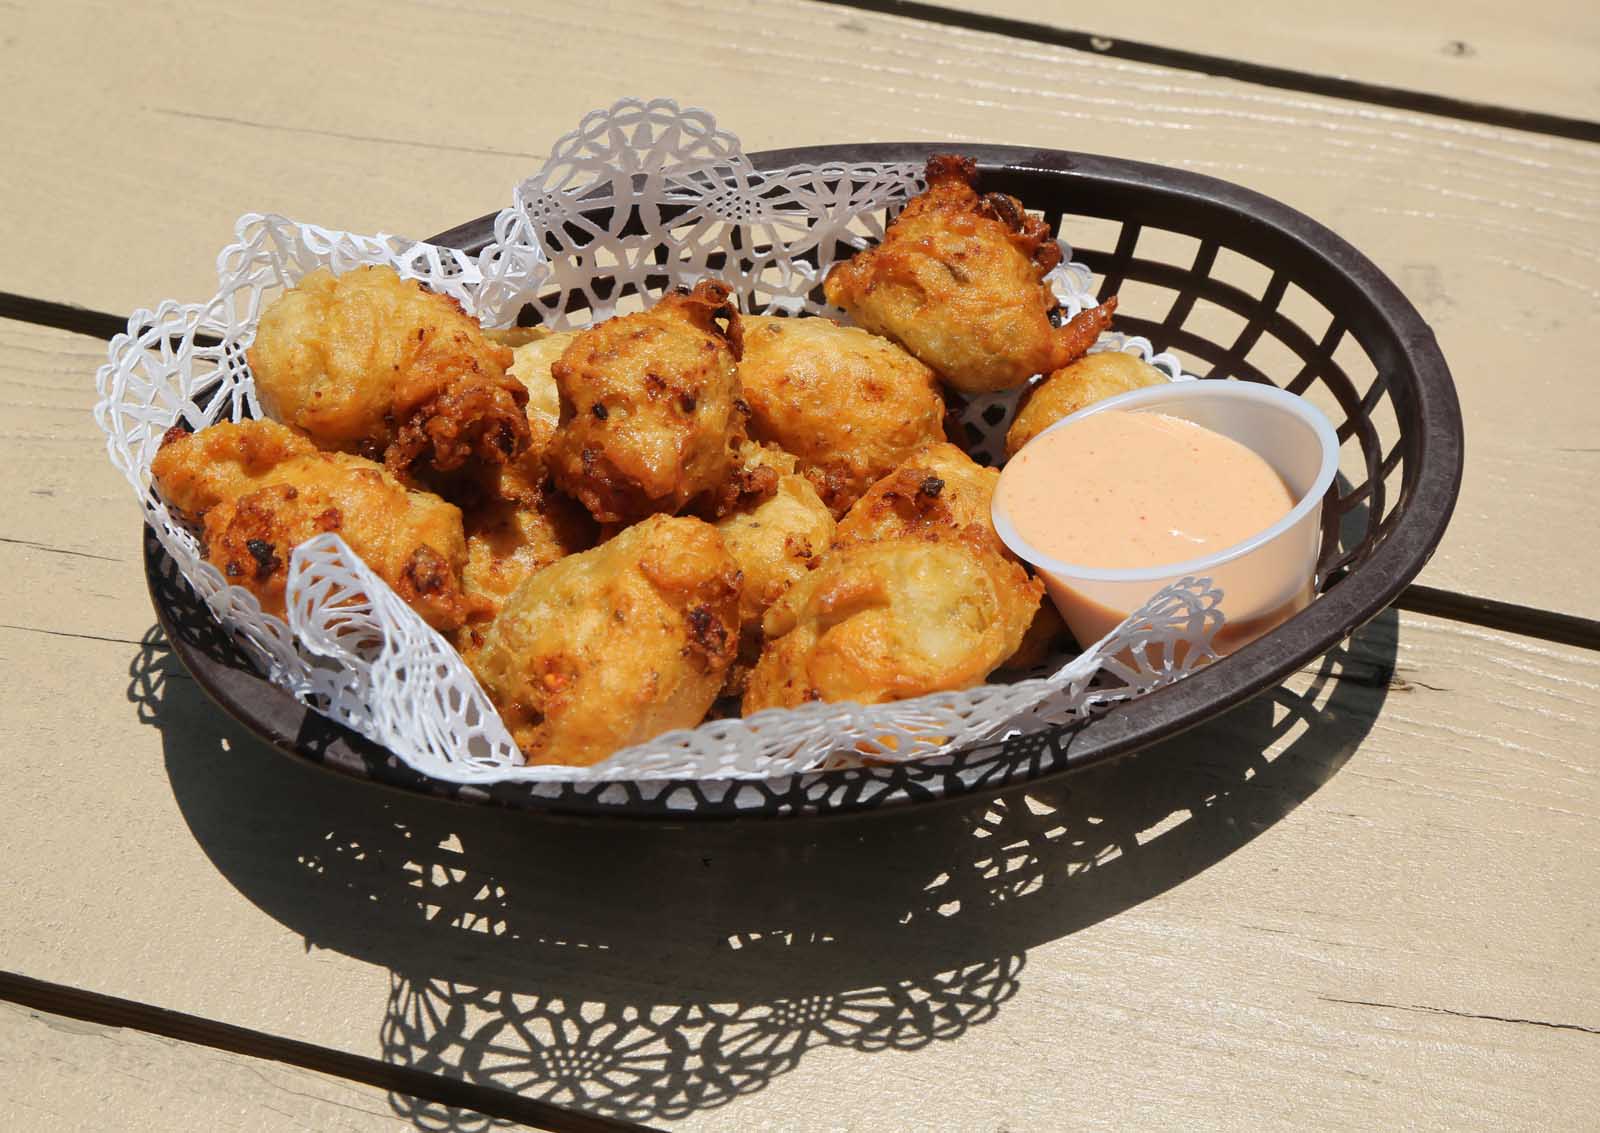 Conch fritters a staple food of the Caribbean